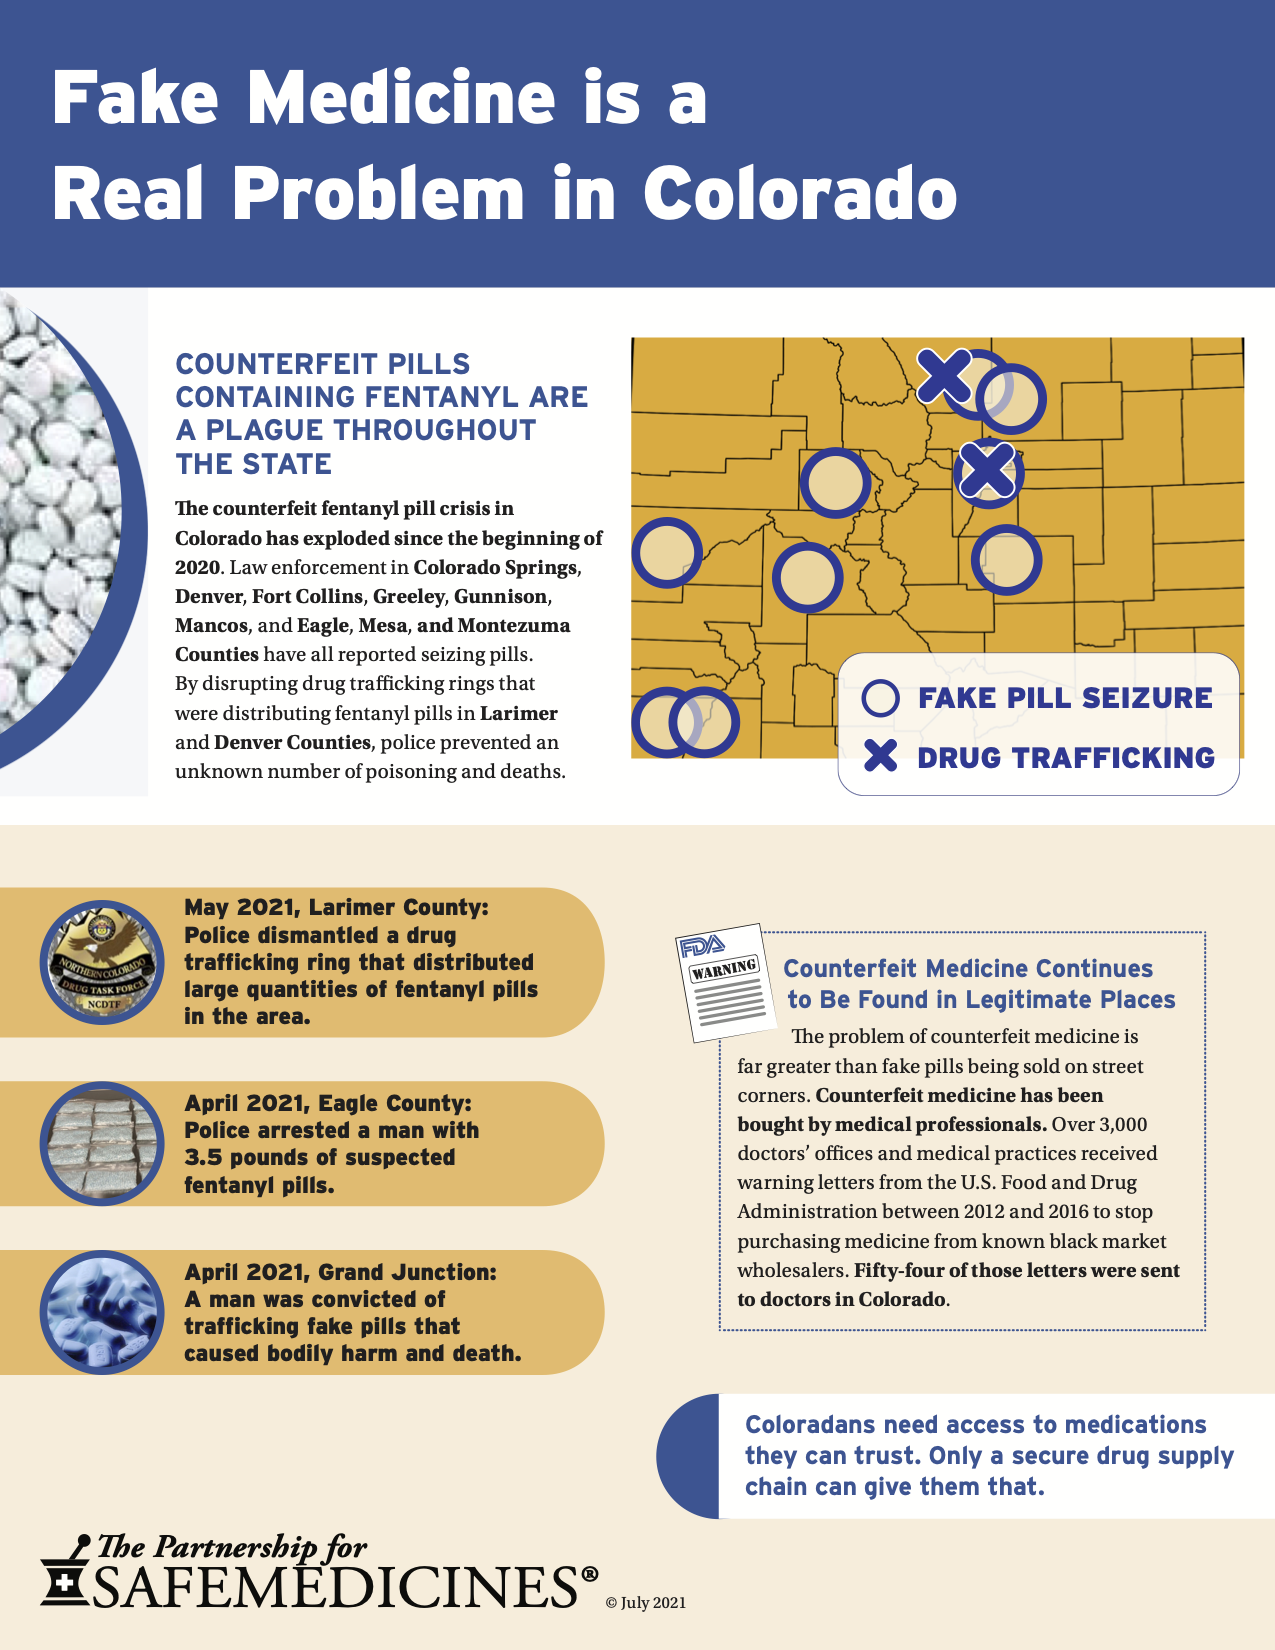 <a href="https://www.safemedicines.org/wp-content/uploads/2021/07/CO-2021-update-infosheet-SECURE.pdf">Download our most recent summary of the situation in Colorado</a>